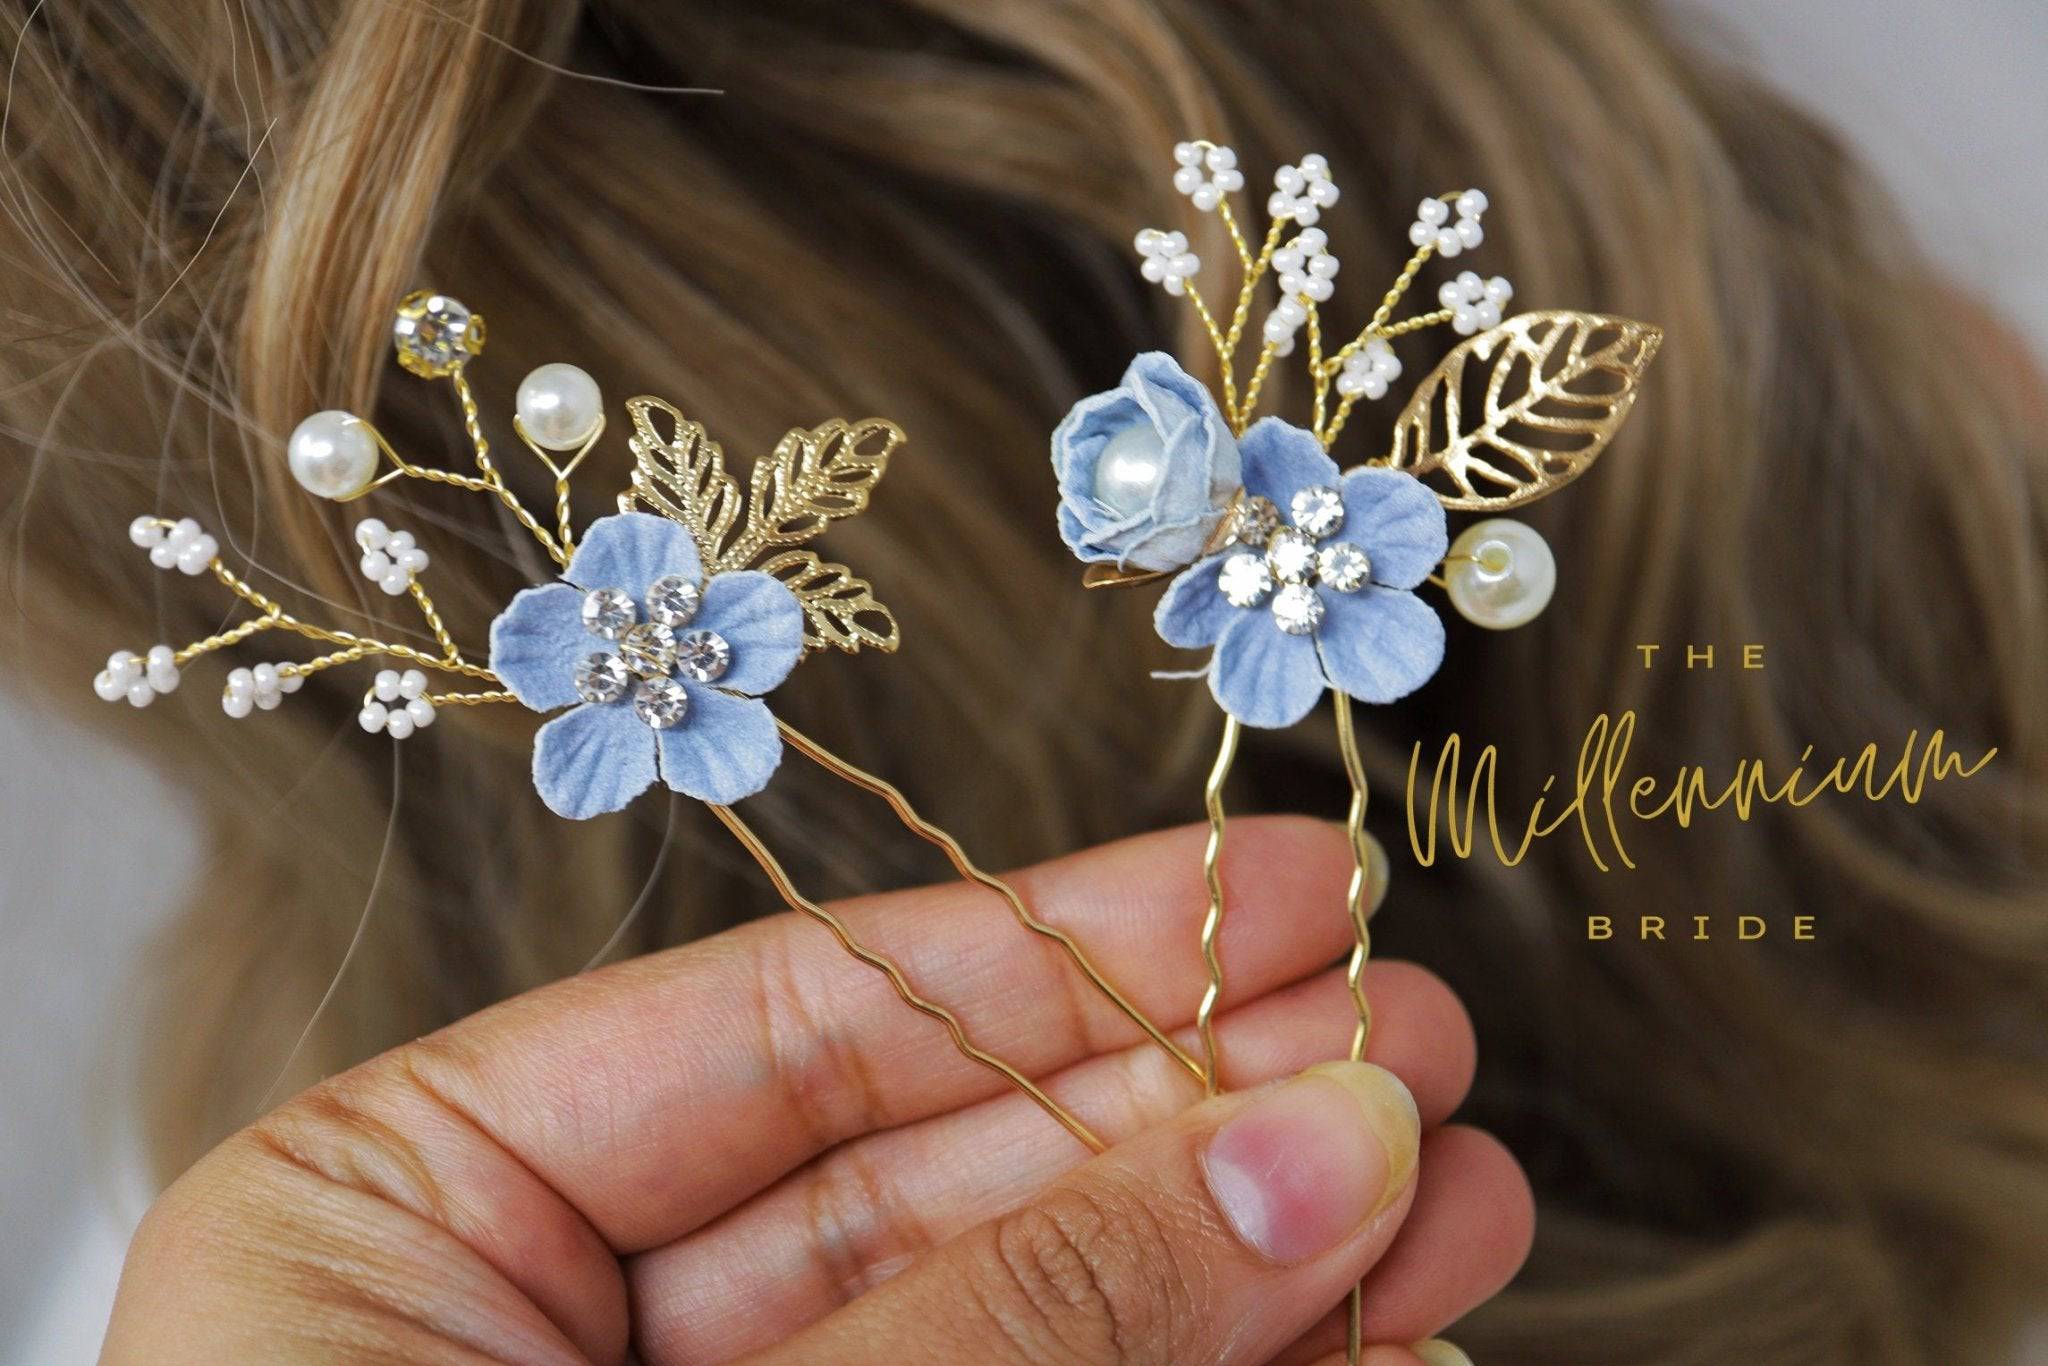 18 Incredible Bridal Hair Accessories & Designers | One Fab Day